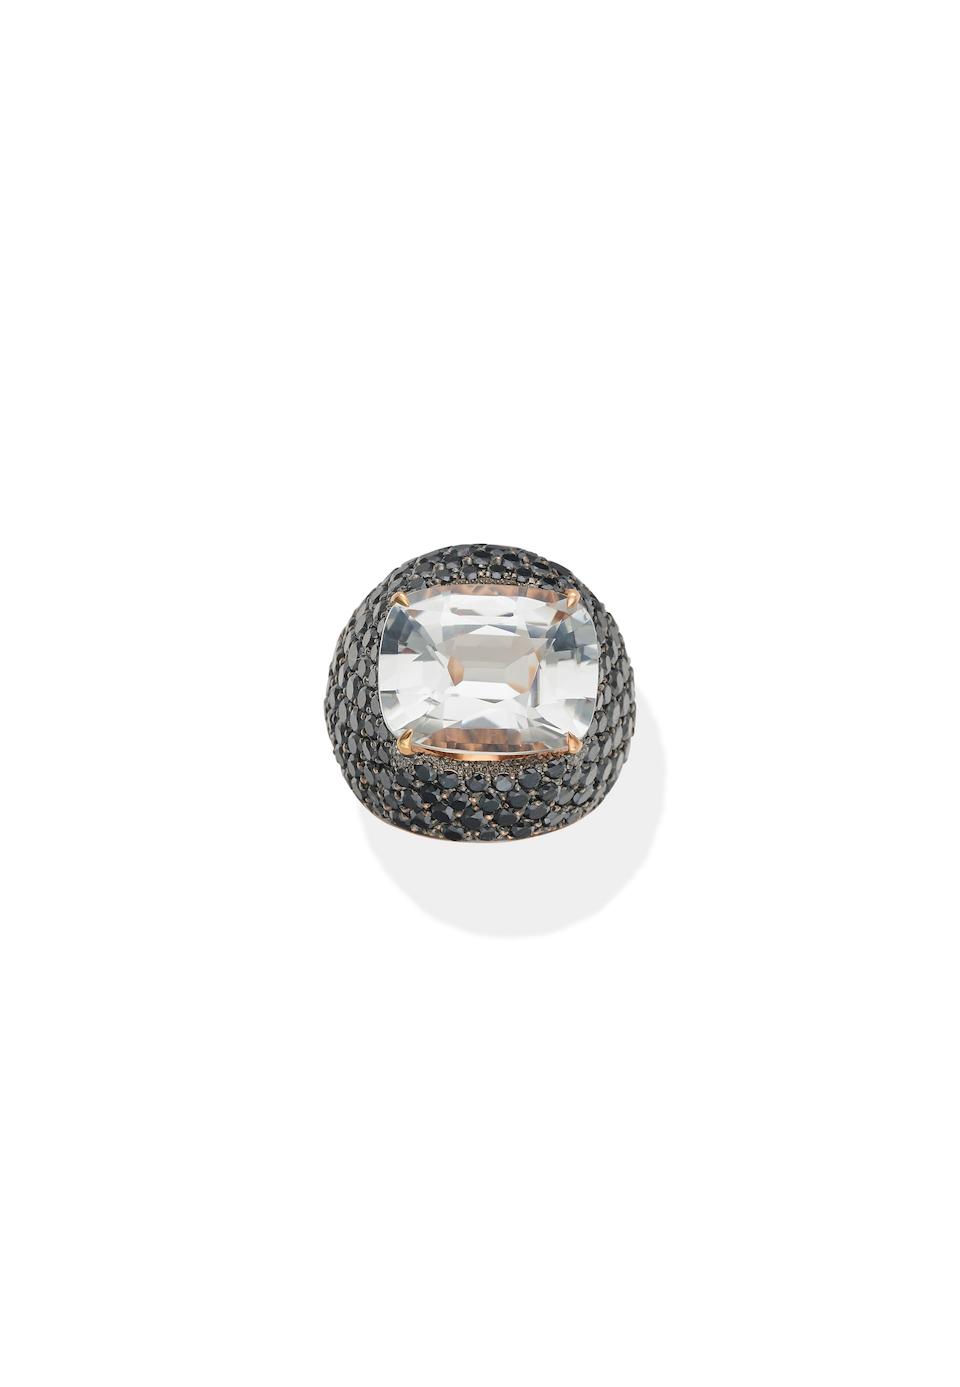 PAOLO COSTAGLI | TOPAZ AND DIAMOND RING - Image 2 of 2